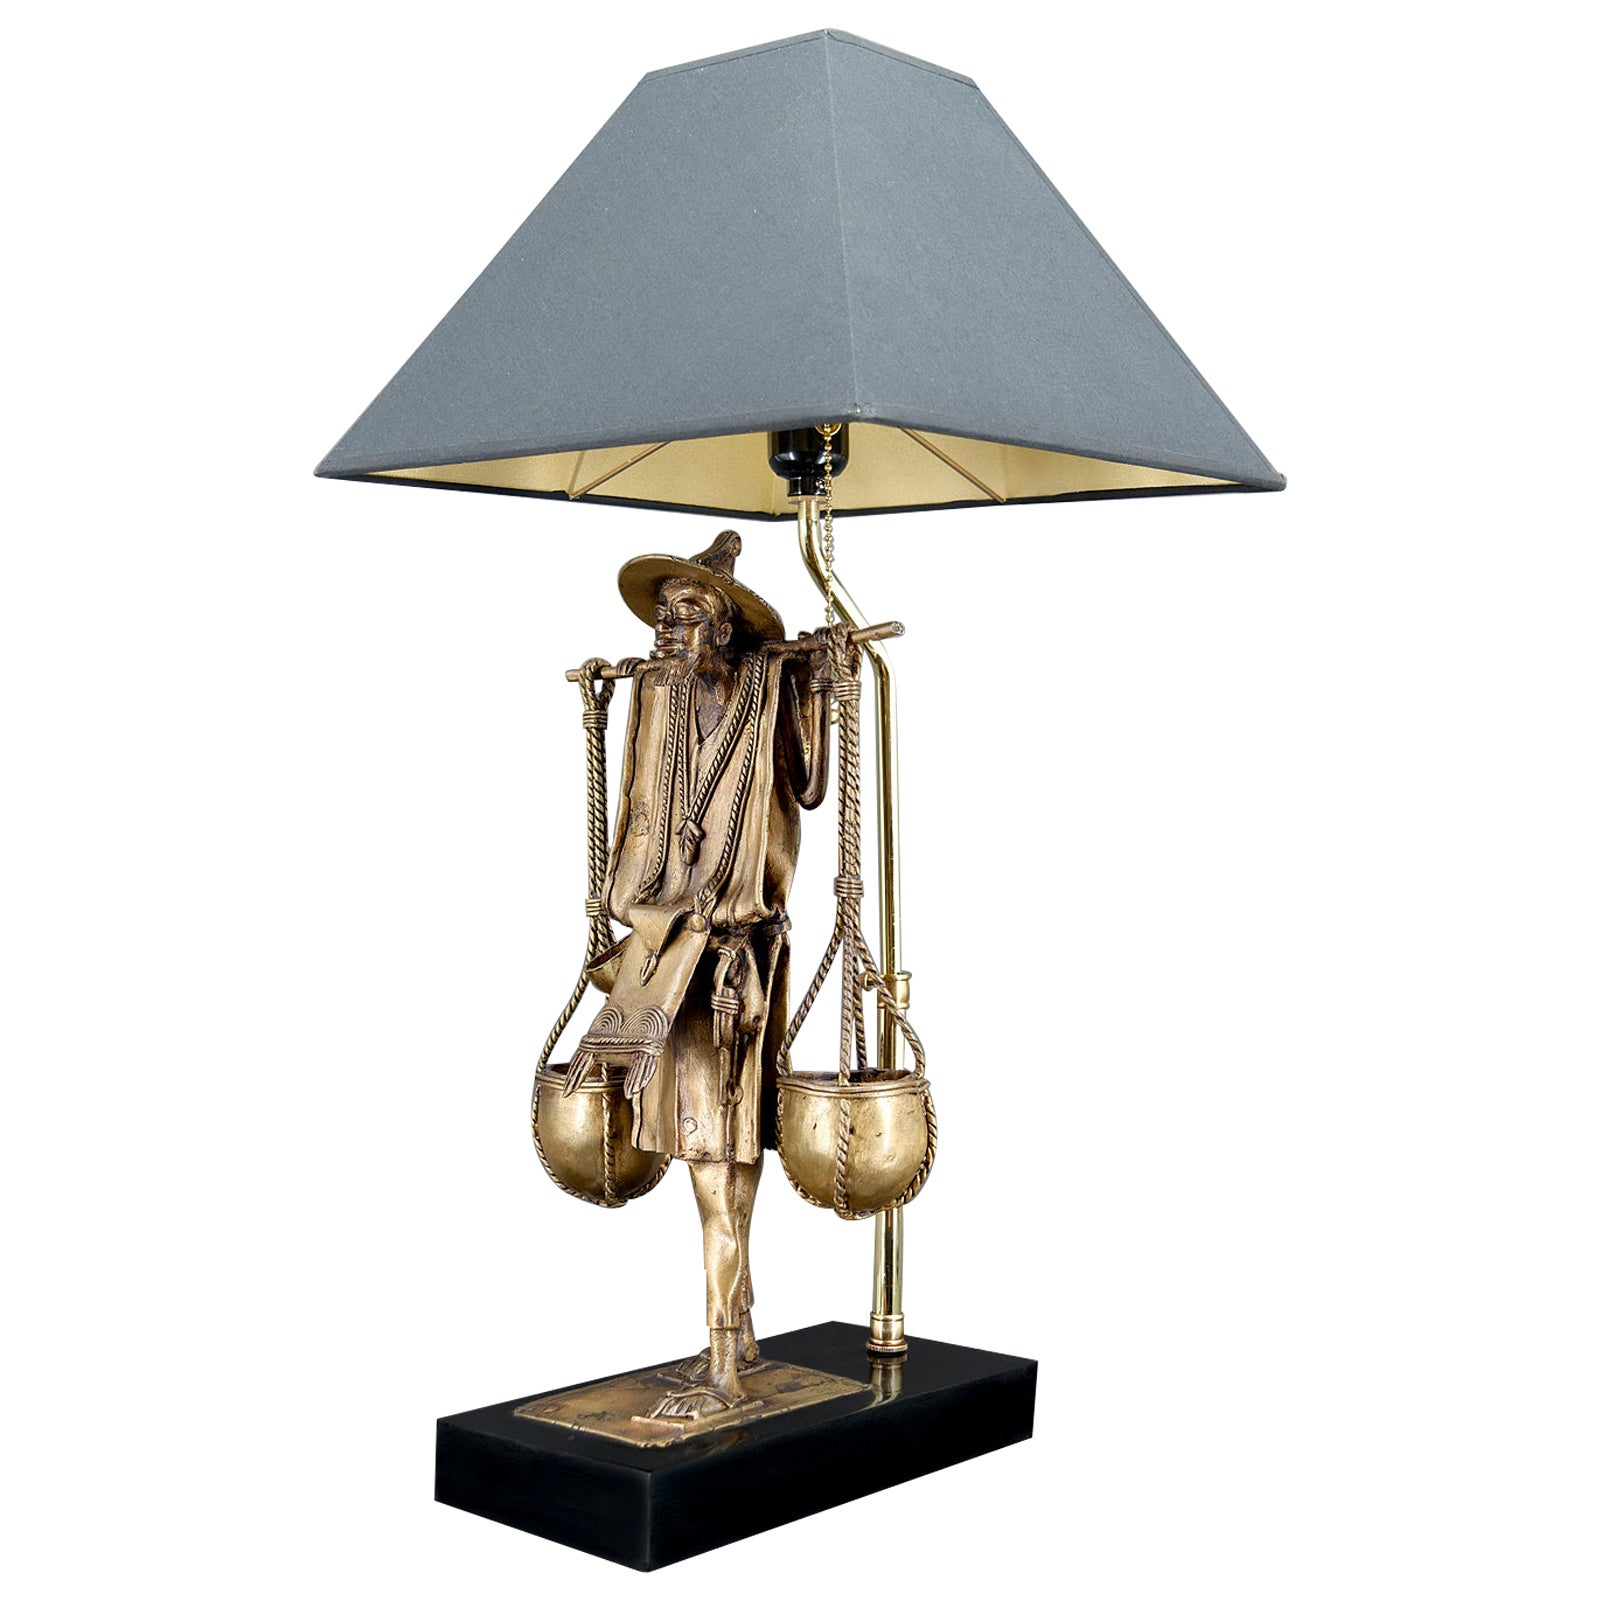 Bronze lamp, "Le Porteur Peul", France, in the style of Maison Charles, 1970's